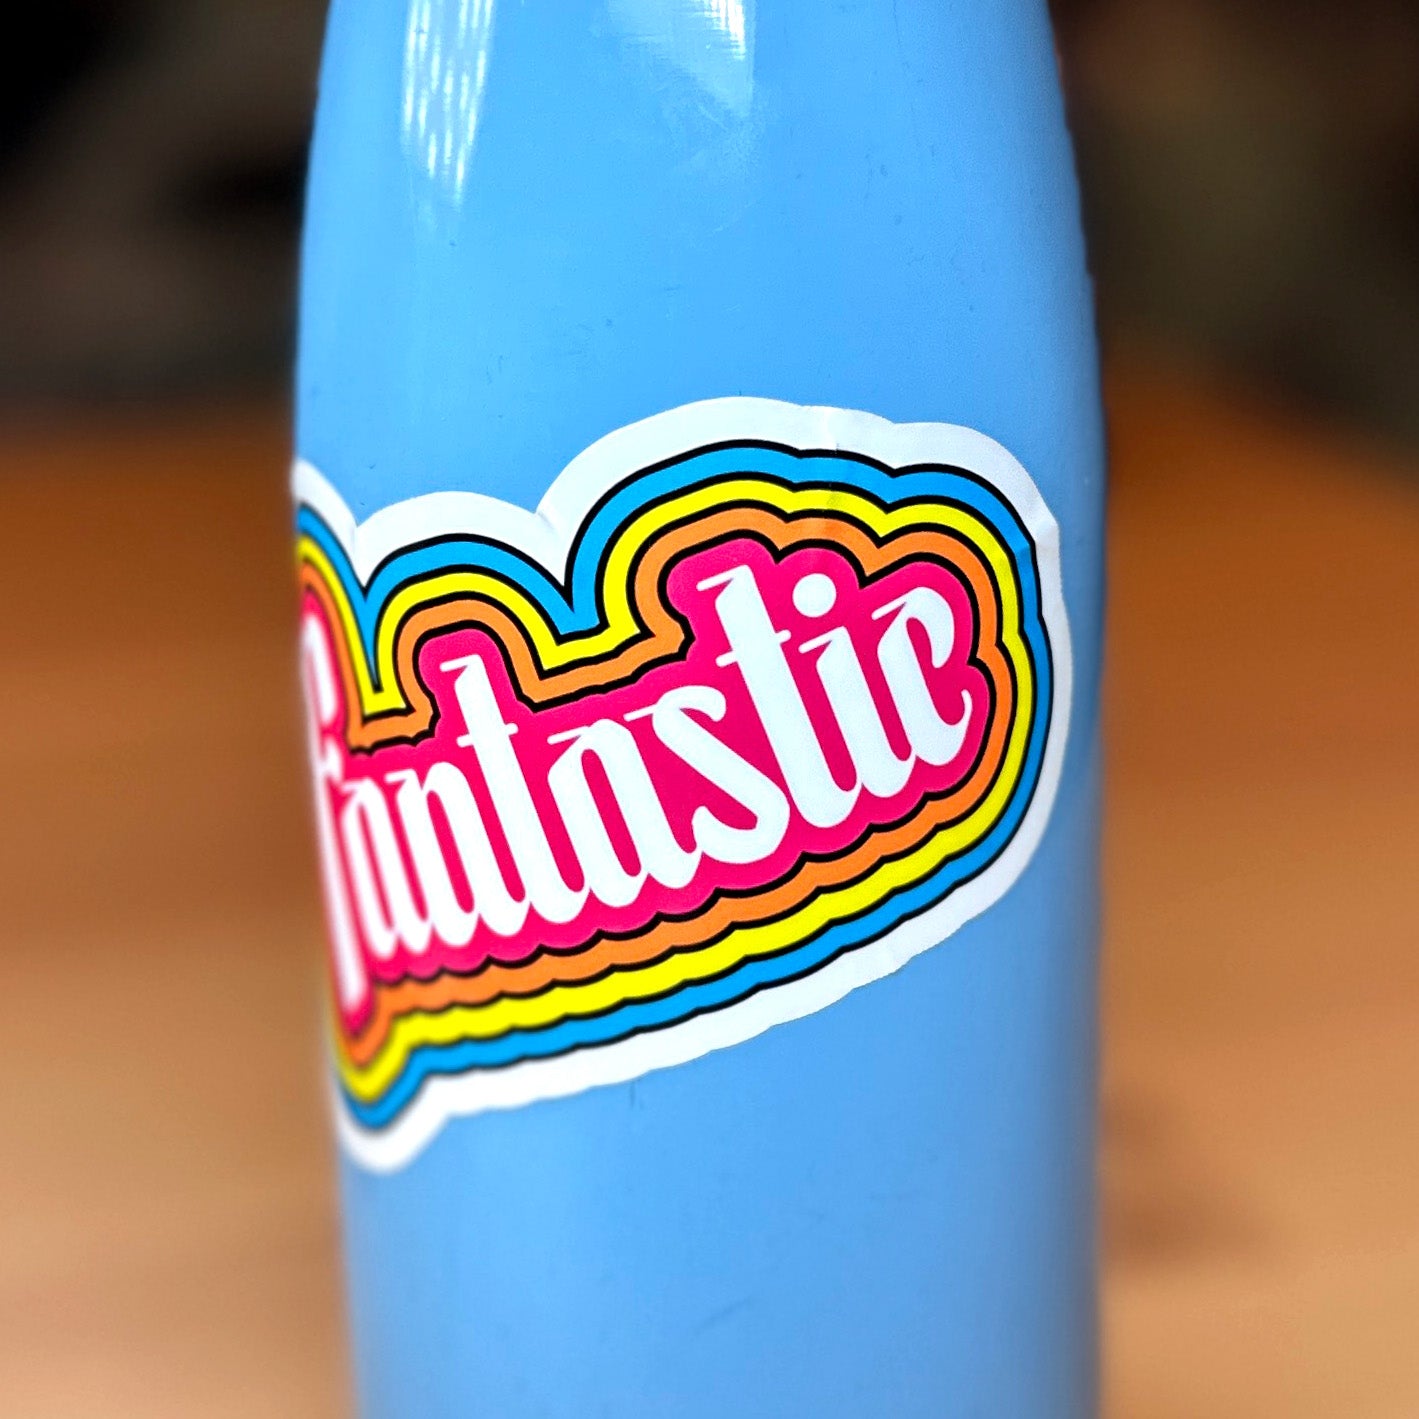 close up photo of a waterproof sticker on a blue metal water bottle that features the word "Fantastic!" with outlines of pink, orange, yellow and blue